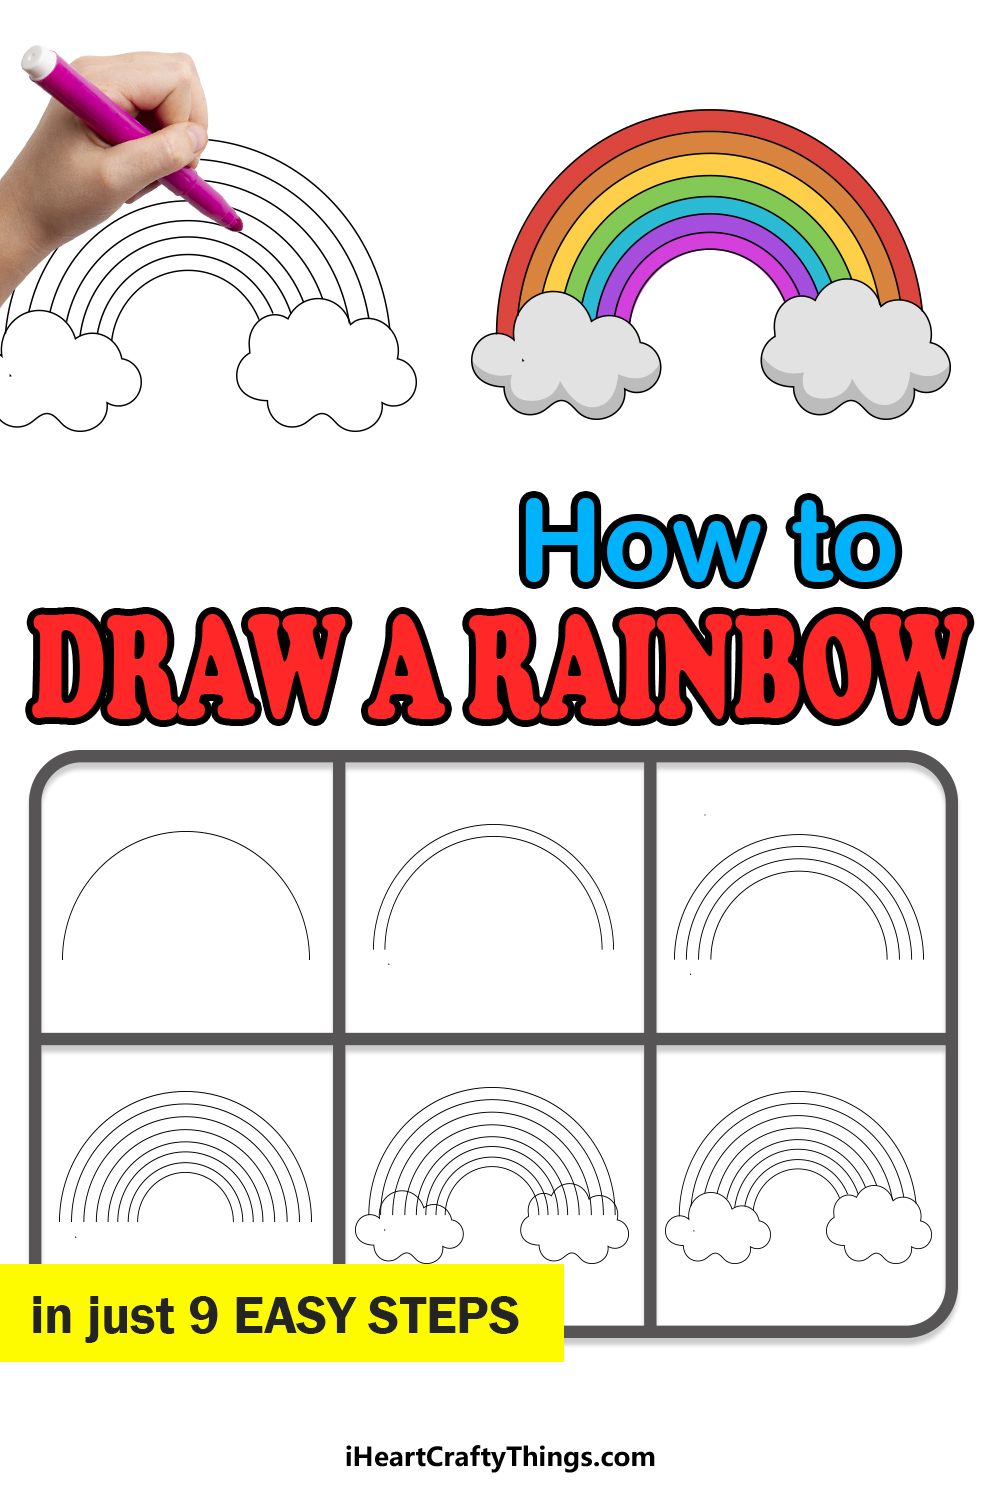 how to draw rainbow in 9 steps